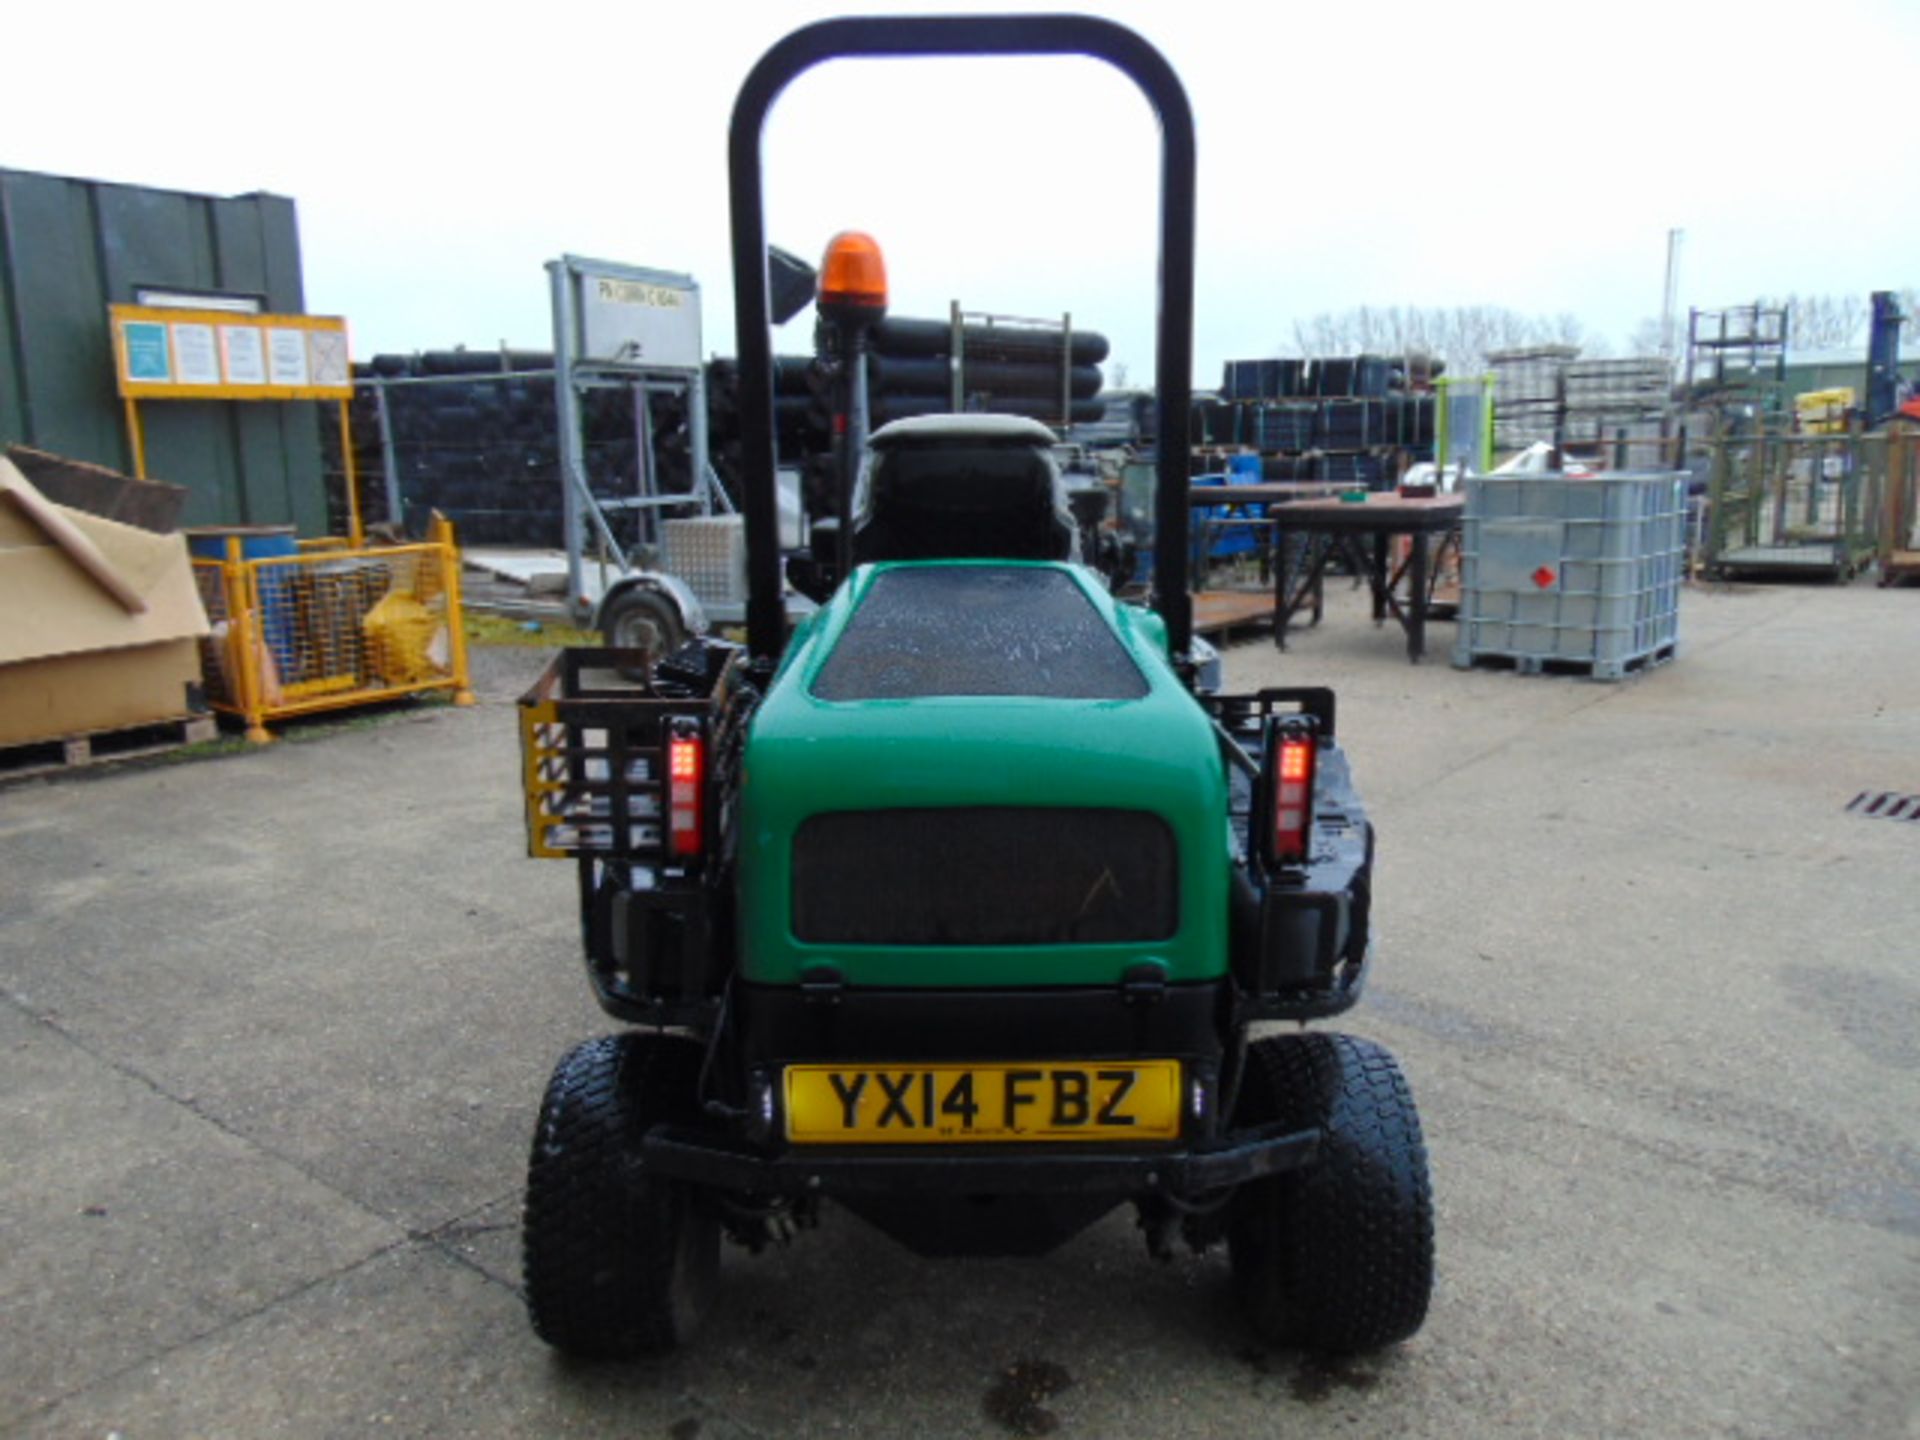 2014 Ransomes HR300 C/W Muthing Outfront Flail Mower ONLY 2,258 HOURS! - Bild 7 aus 19